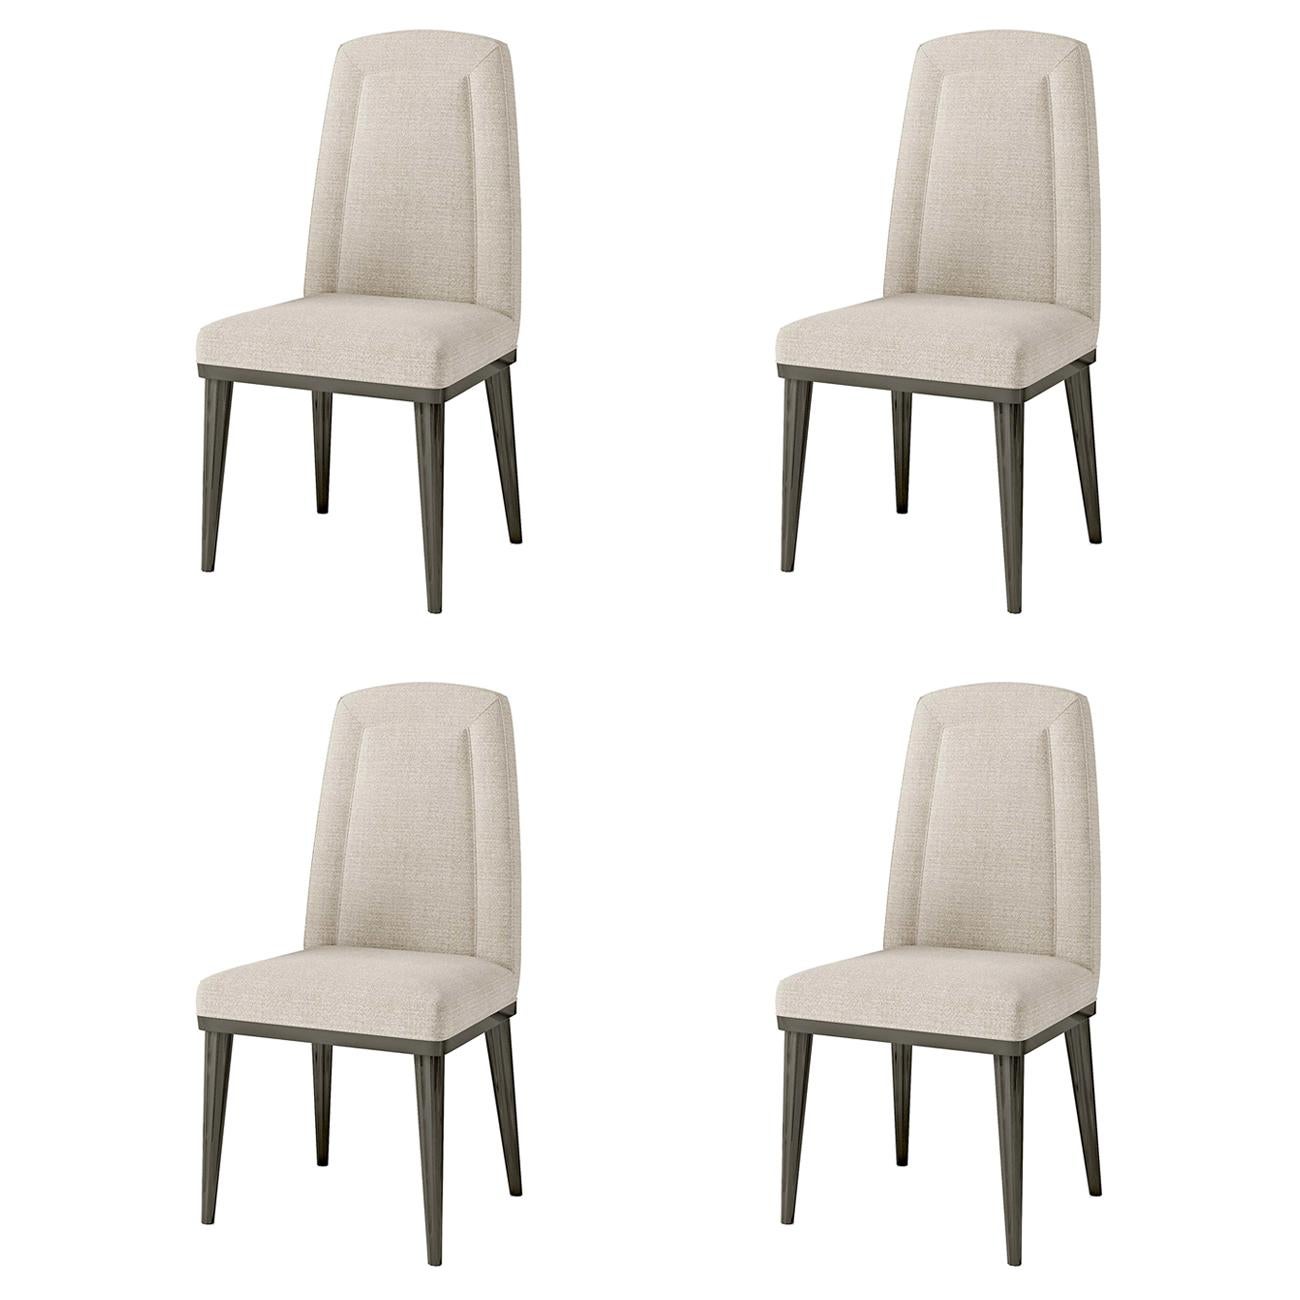 Denice Set of 4 Chairs